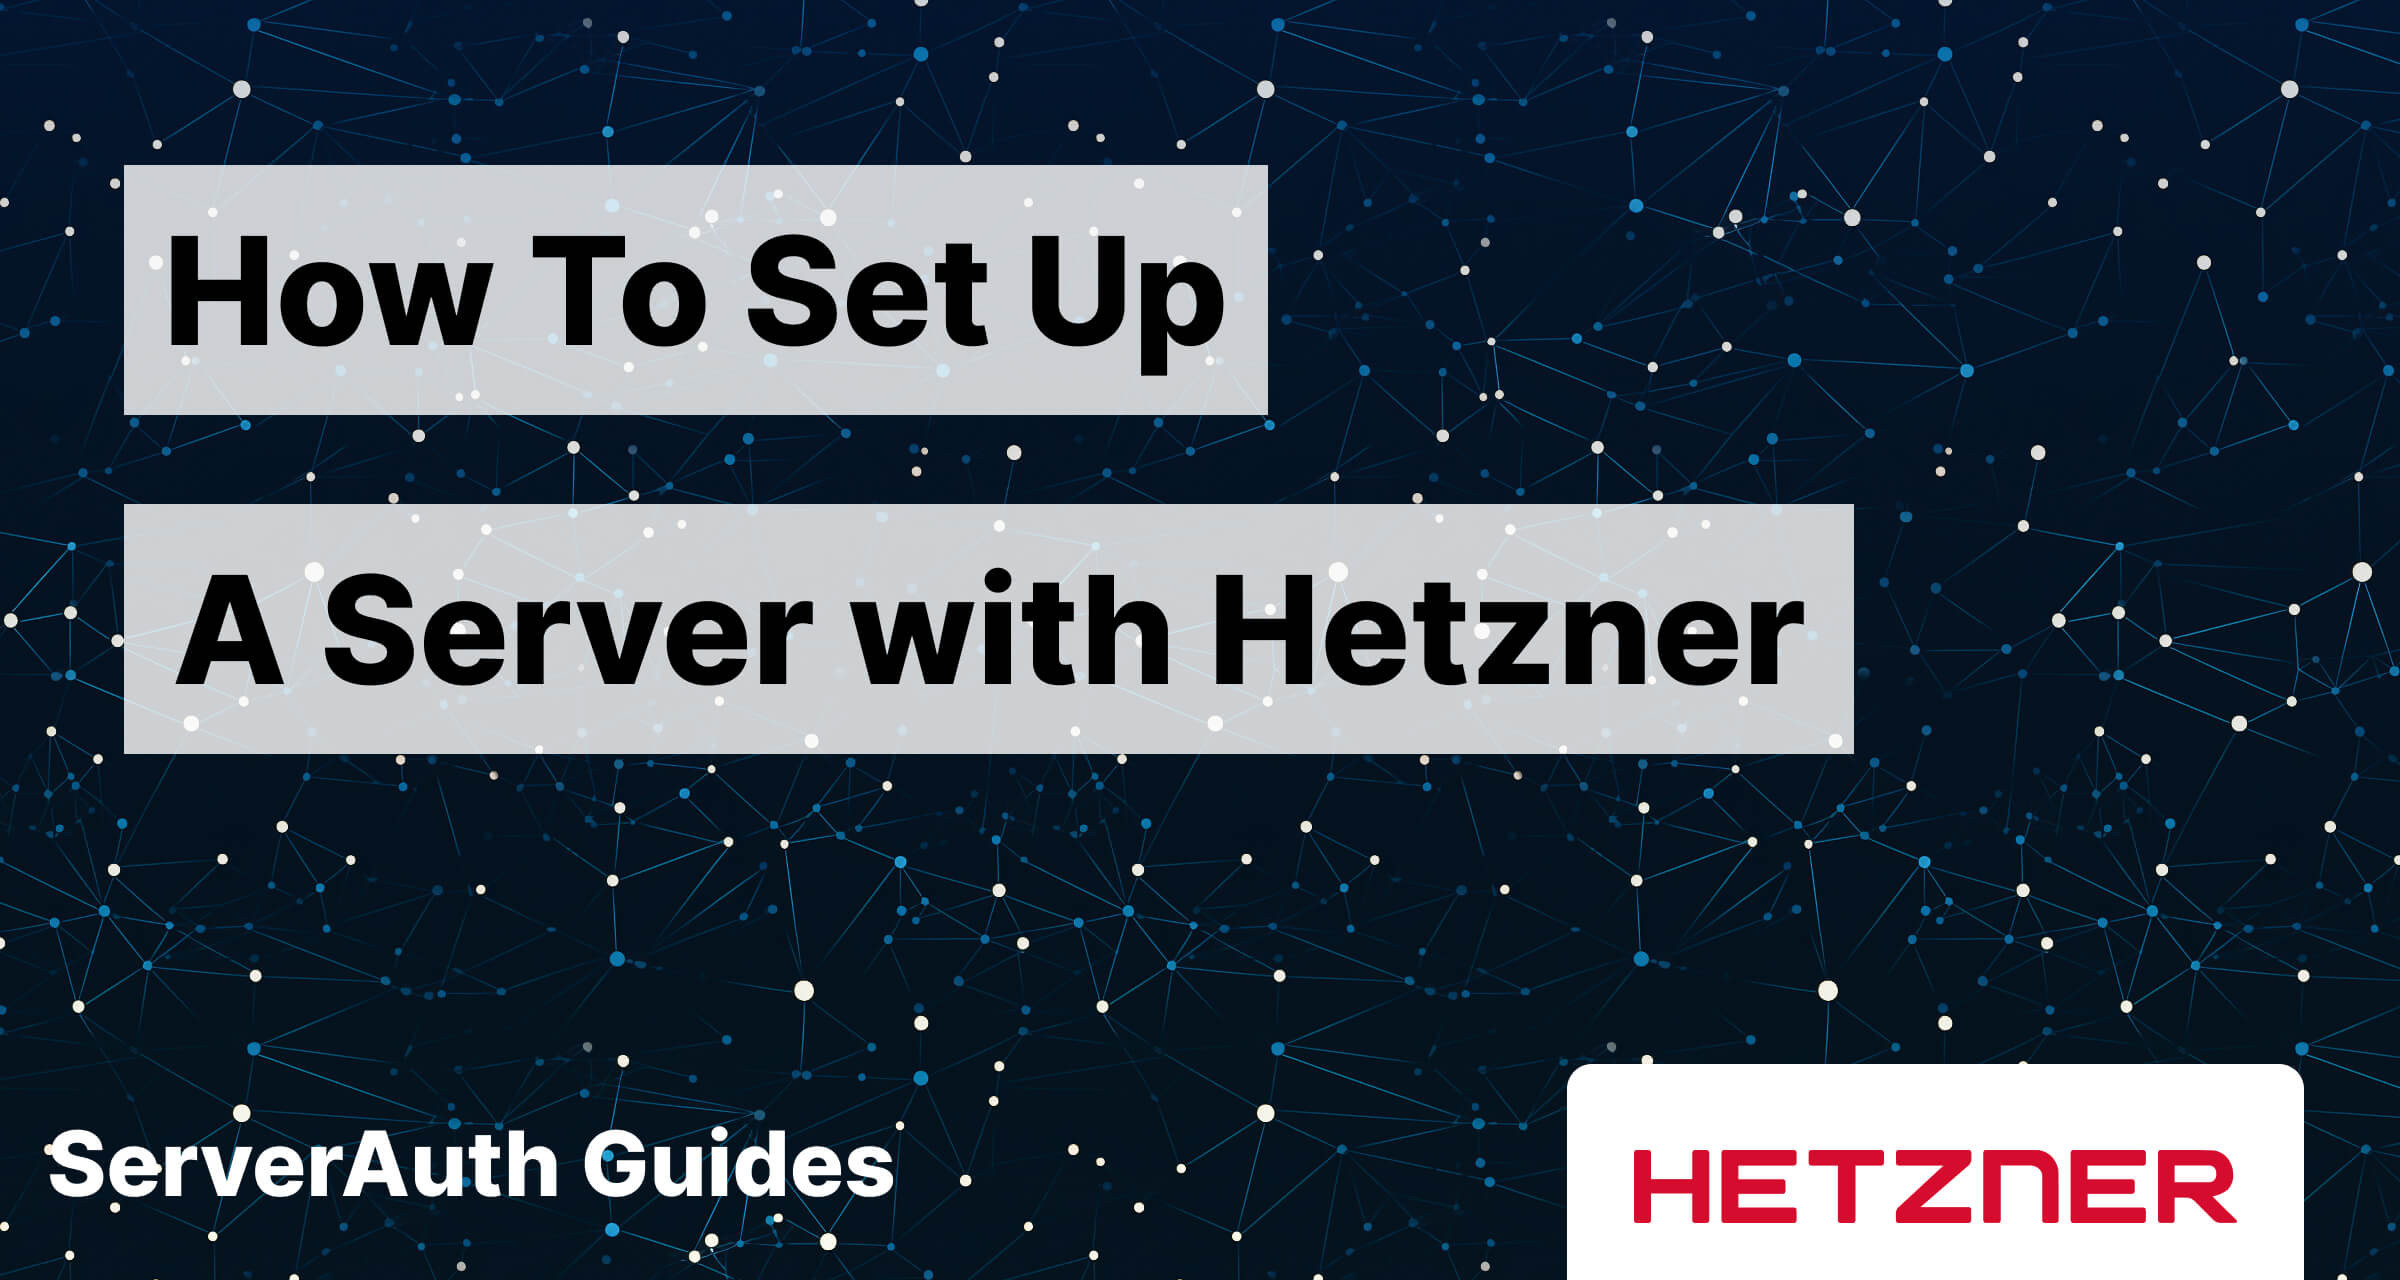 How to set up a server with Hetzner